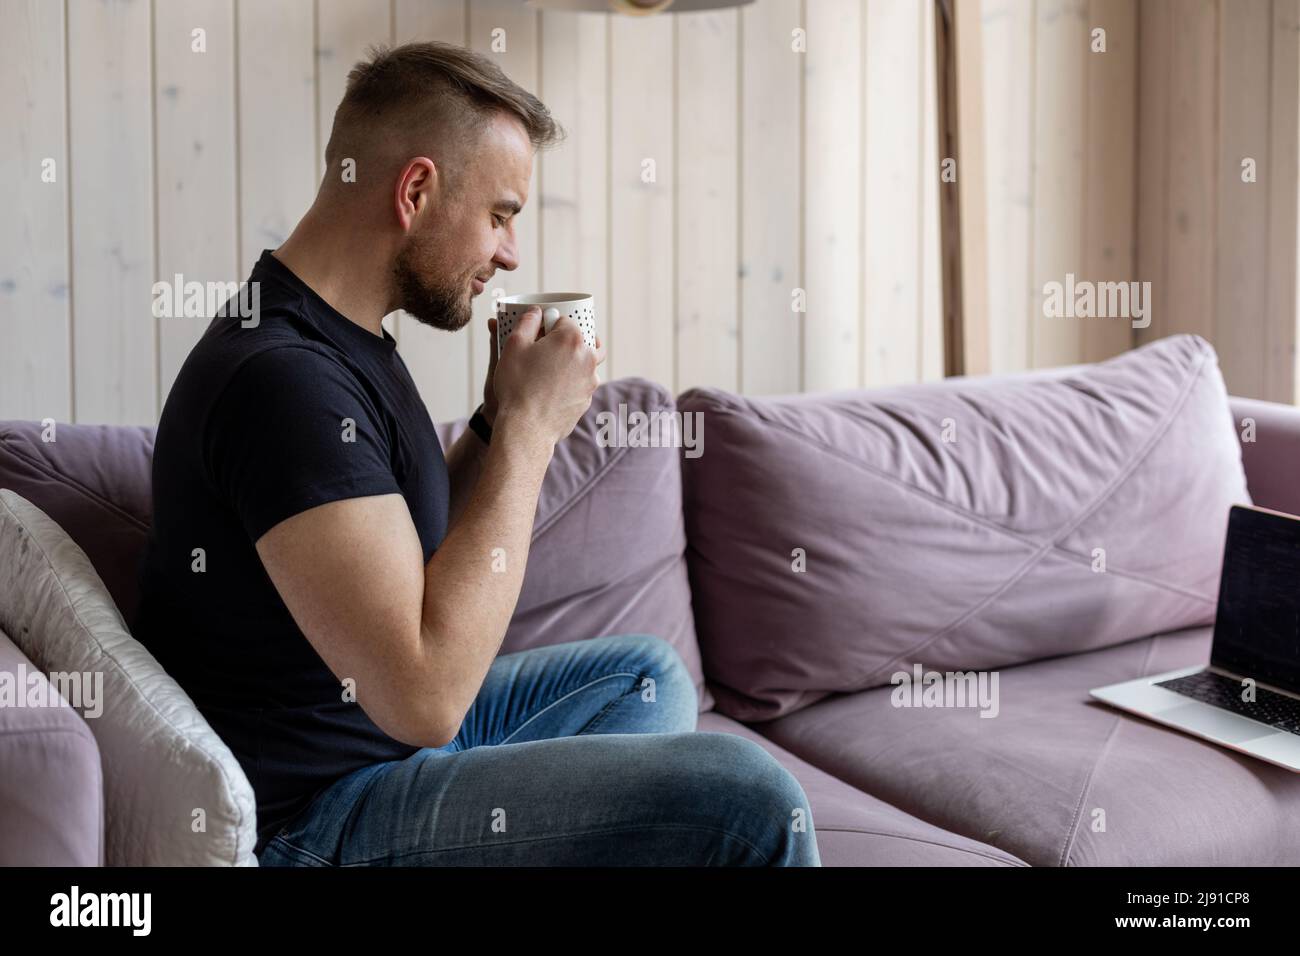 Work at home online. Young man with short stylish haircut in black T-shirt and jeans is sitting on cozy sofa and enjoying a cup of hot coffee, pre Stock Photo